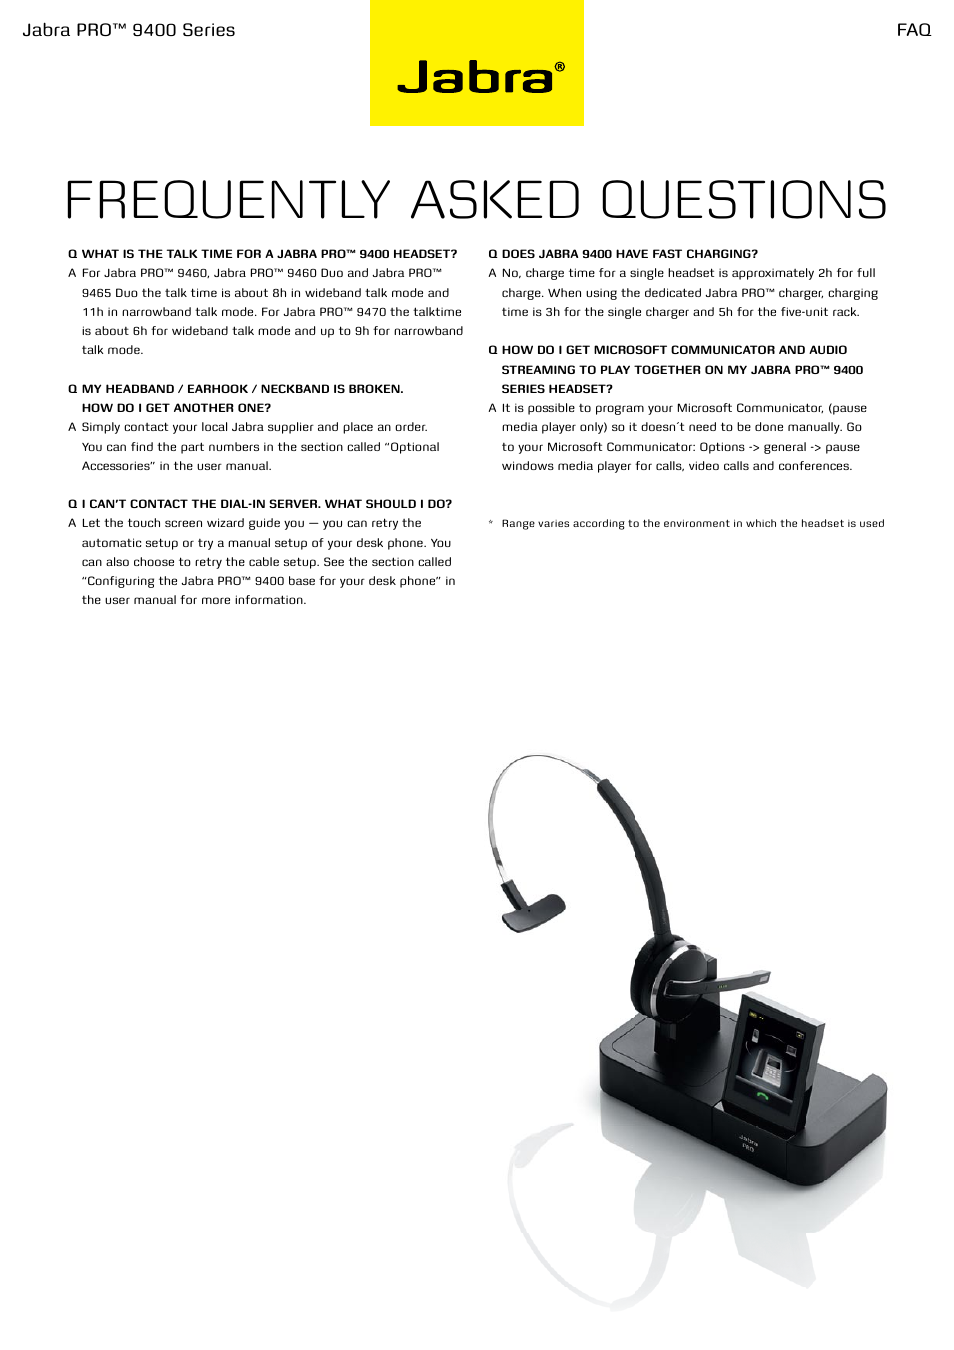 Frequently asked questions, Jabra pro™ 9400 series | Jabra PRO 9400 User  Manual | Page 3 / 3